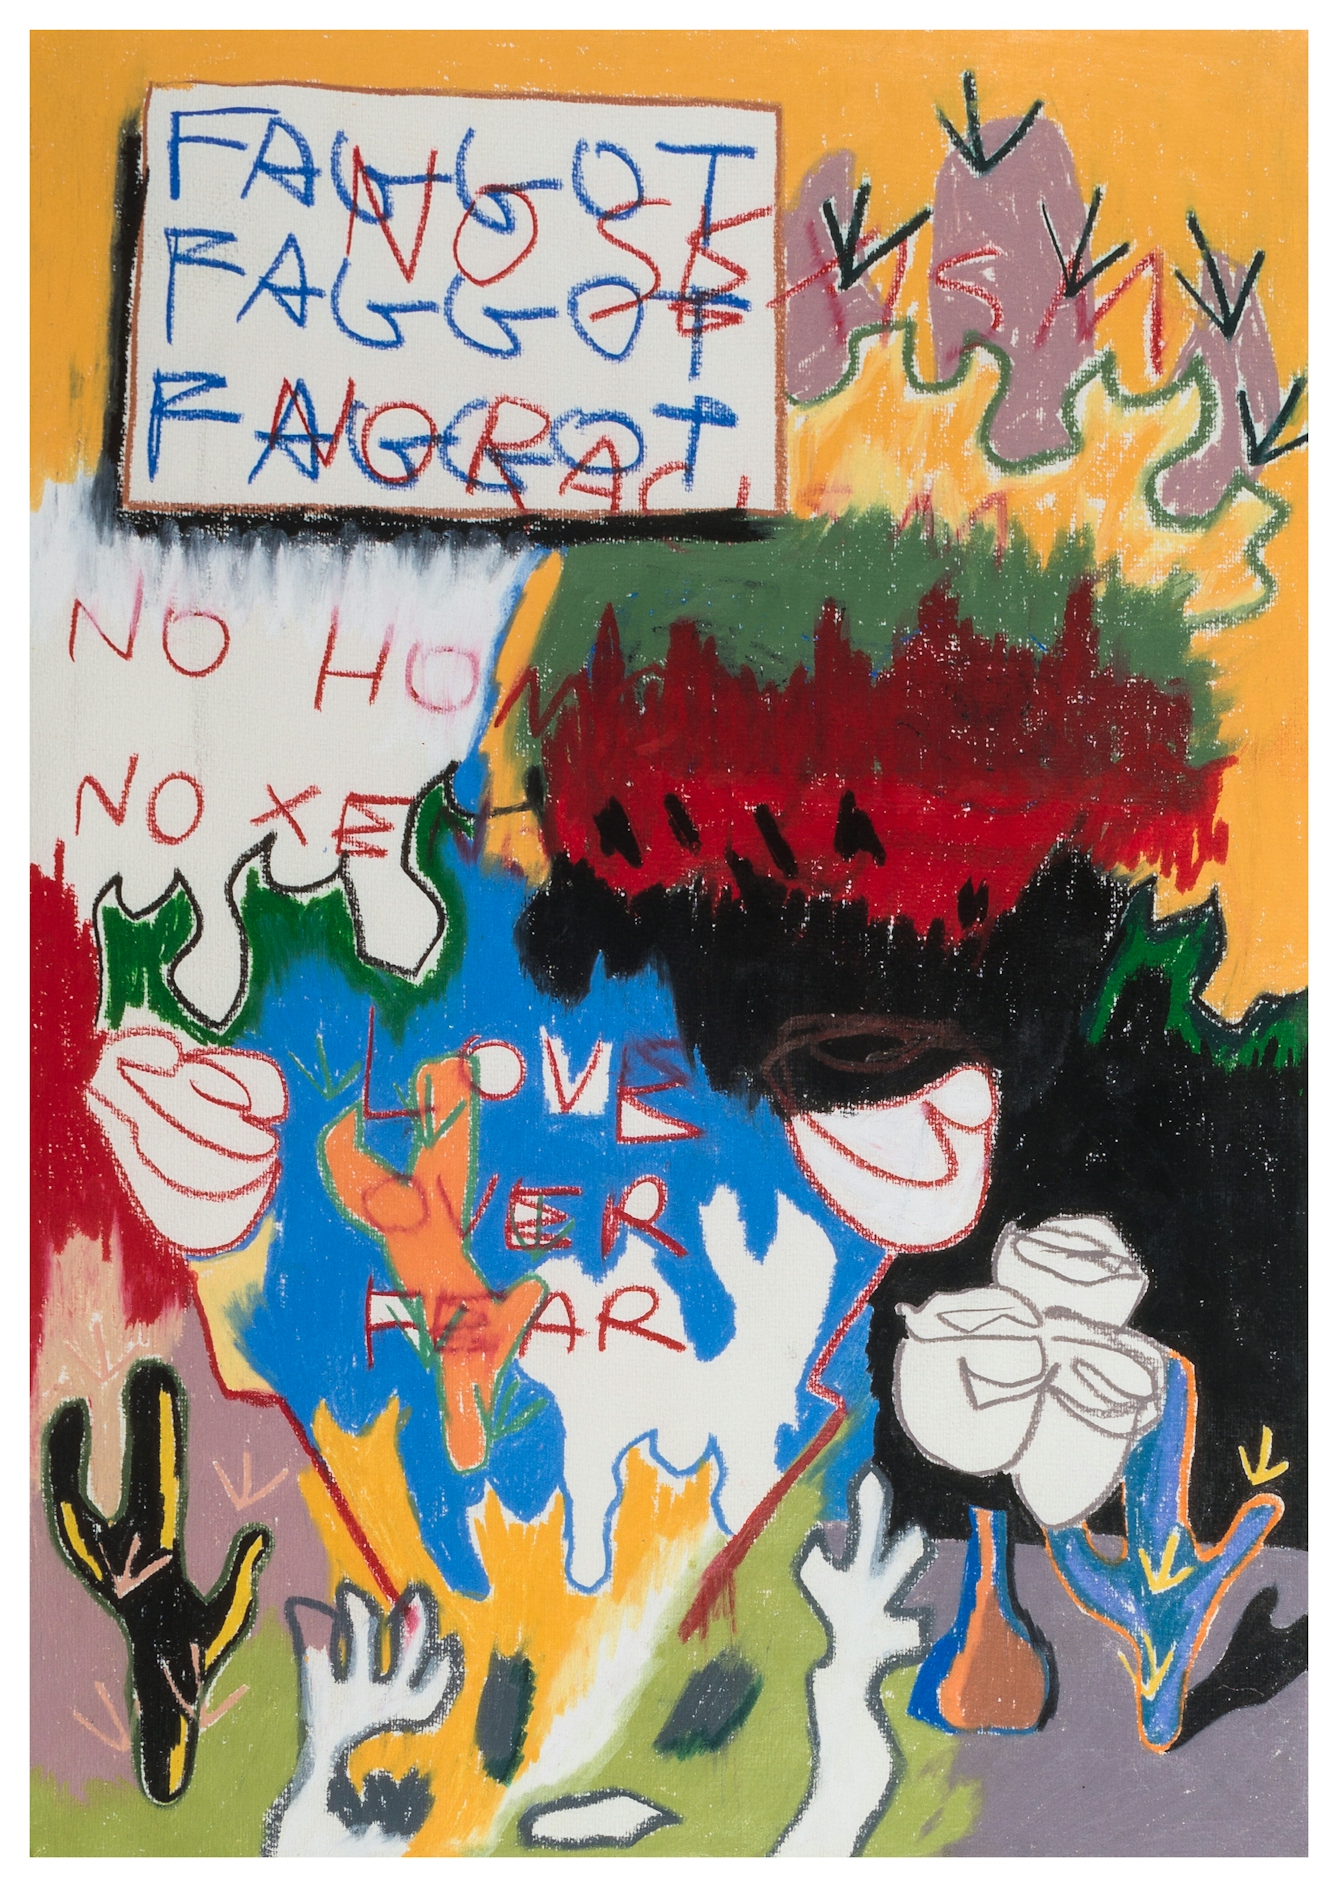 Painted abstract and expressive artwork made up of vibrant colours and graphic forms. The scene shows a busy scene made up of many elements overlapping and interacting. At the top is a rectangular sign with the words "FAGGOT FAGGOT FAGGOT" in blue, repeated vertically. On top of these words are words in red which are less clear but read, "NO SEXISM NO RACISM NO HOMO..." The background in made up of masses of colour, blues, yellow, green, black and red. There are recognisable elements such as a vase of roses, cactus shapes and arms reaching out. In the centre, in red are the words, "LOVE OVER FEAR".